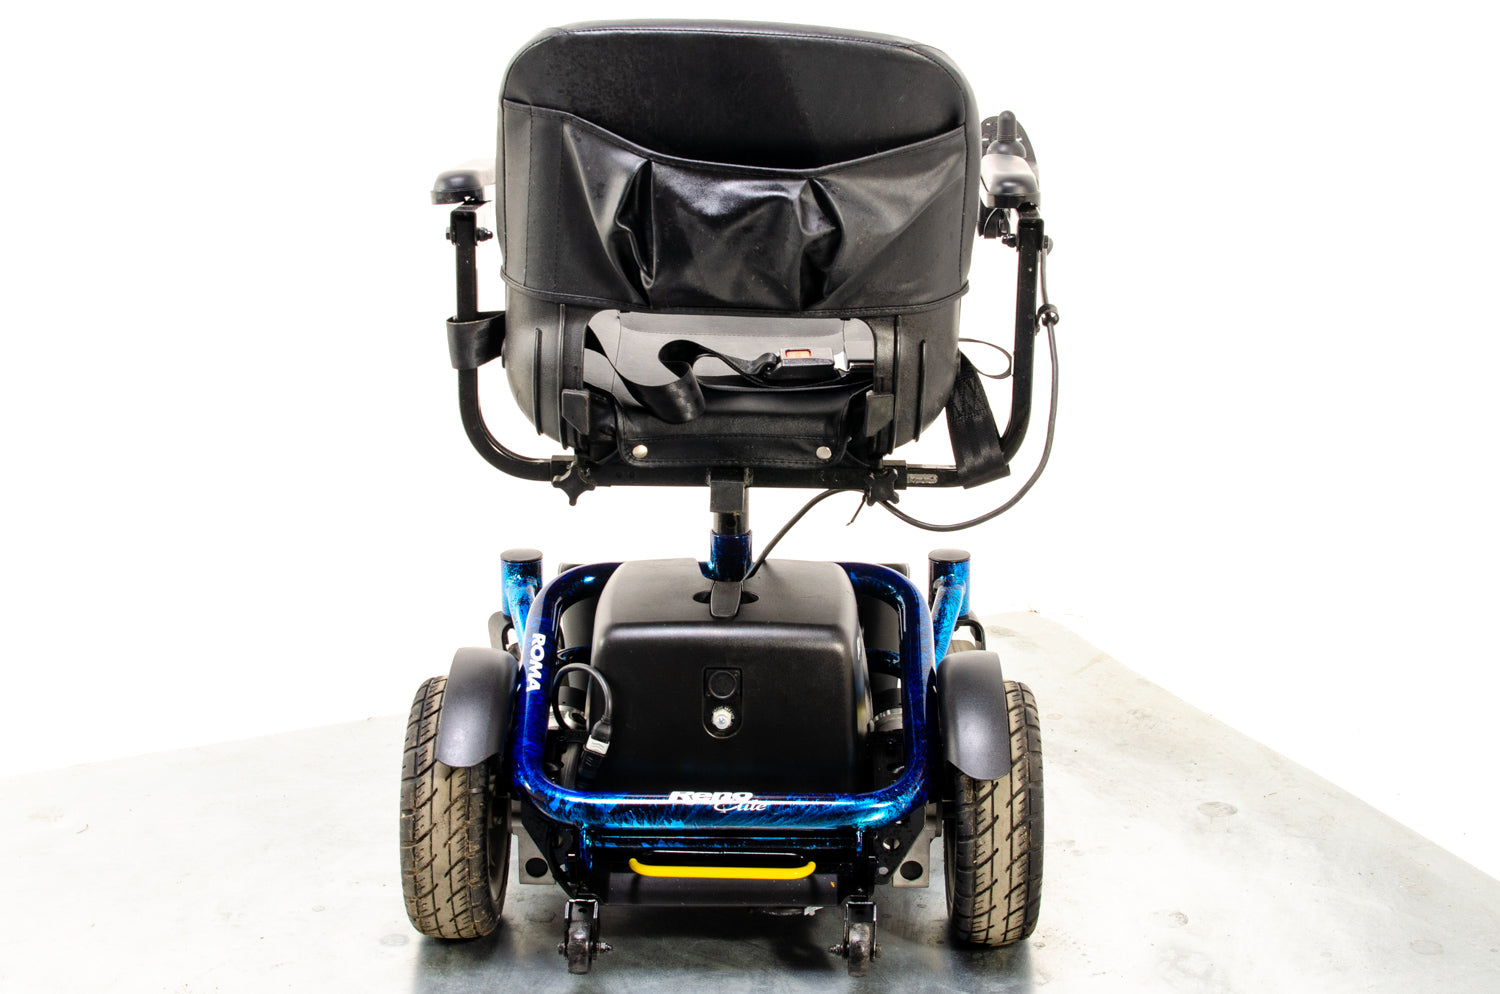 Roma Reno Elite Used Electric Wheelchair Powerchair Flame Blue indoor Outdoor Transportable 12176